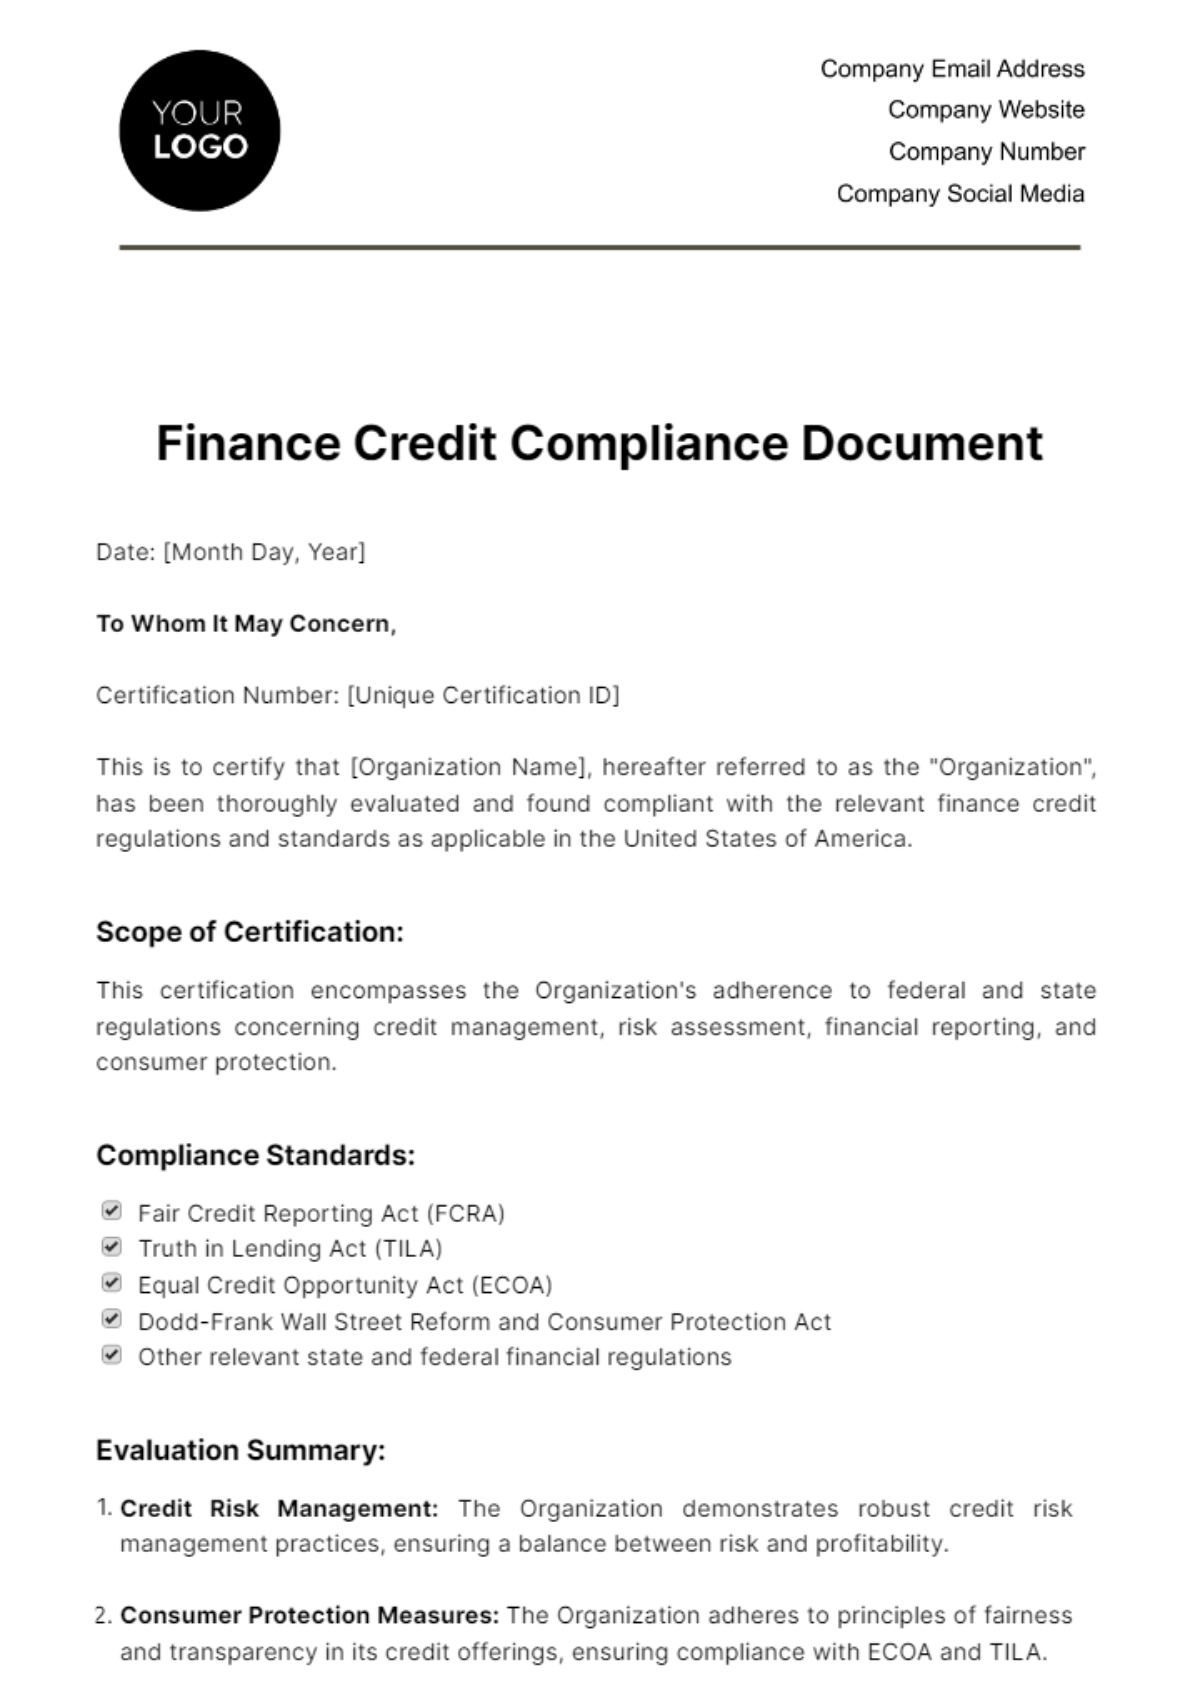 Free Finance Credit Compliance Document Template